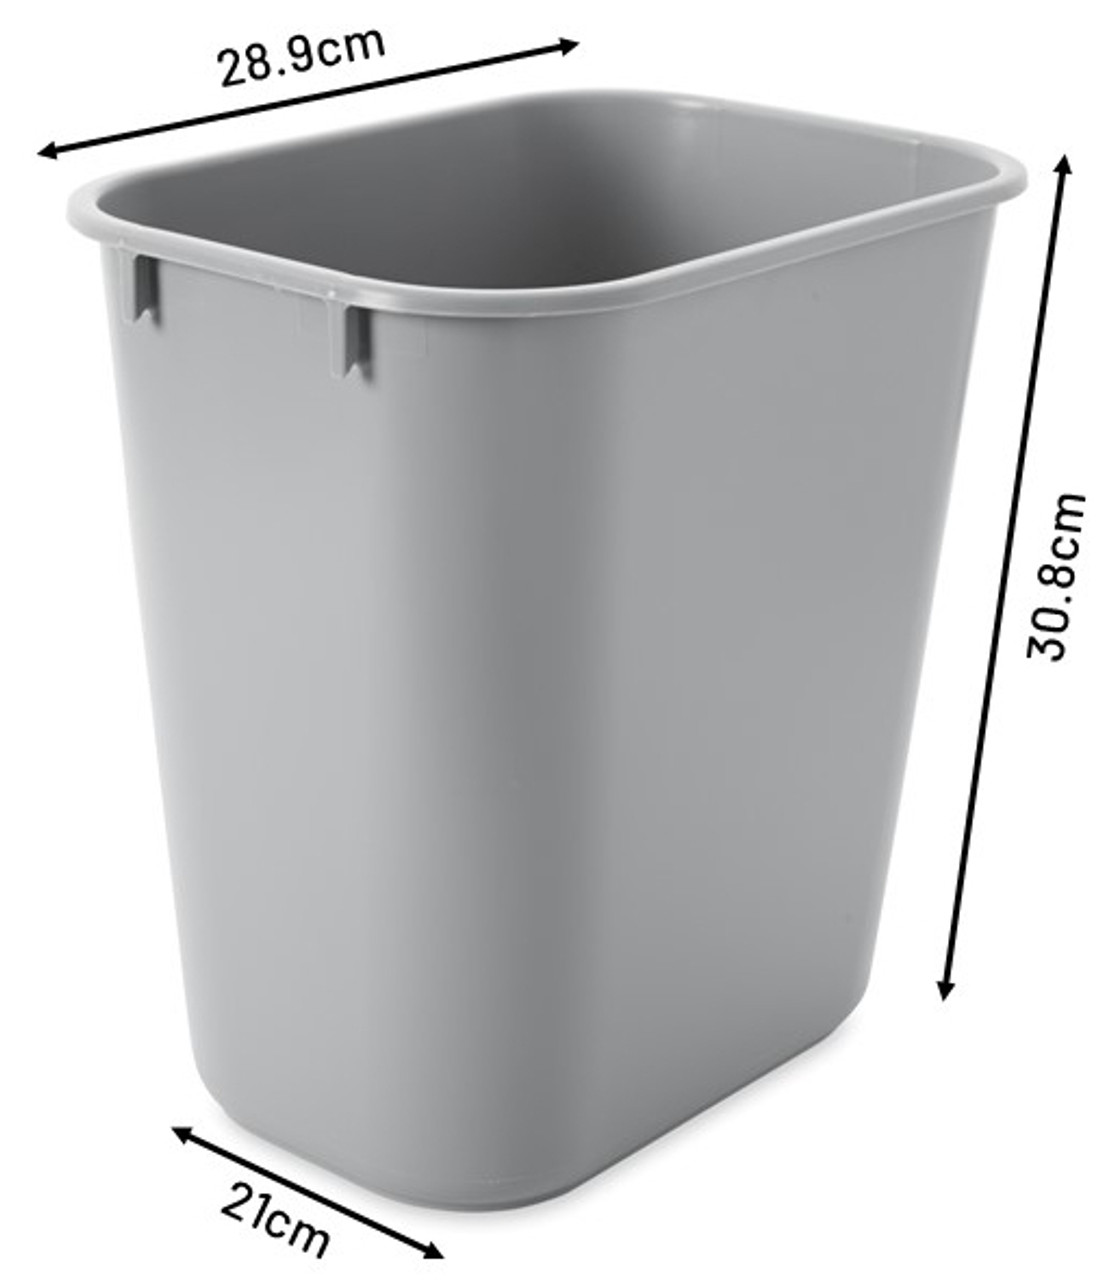 FG295500GRAY - Small footprint and low height make container ideal for under desk or deskside placement